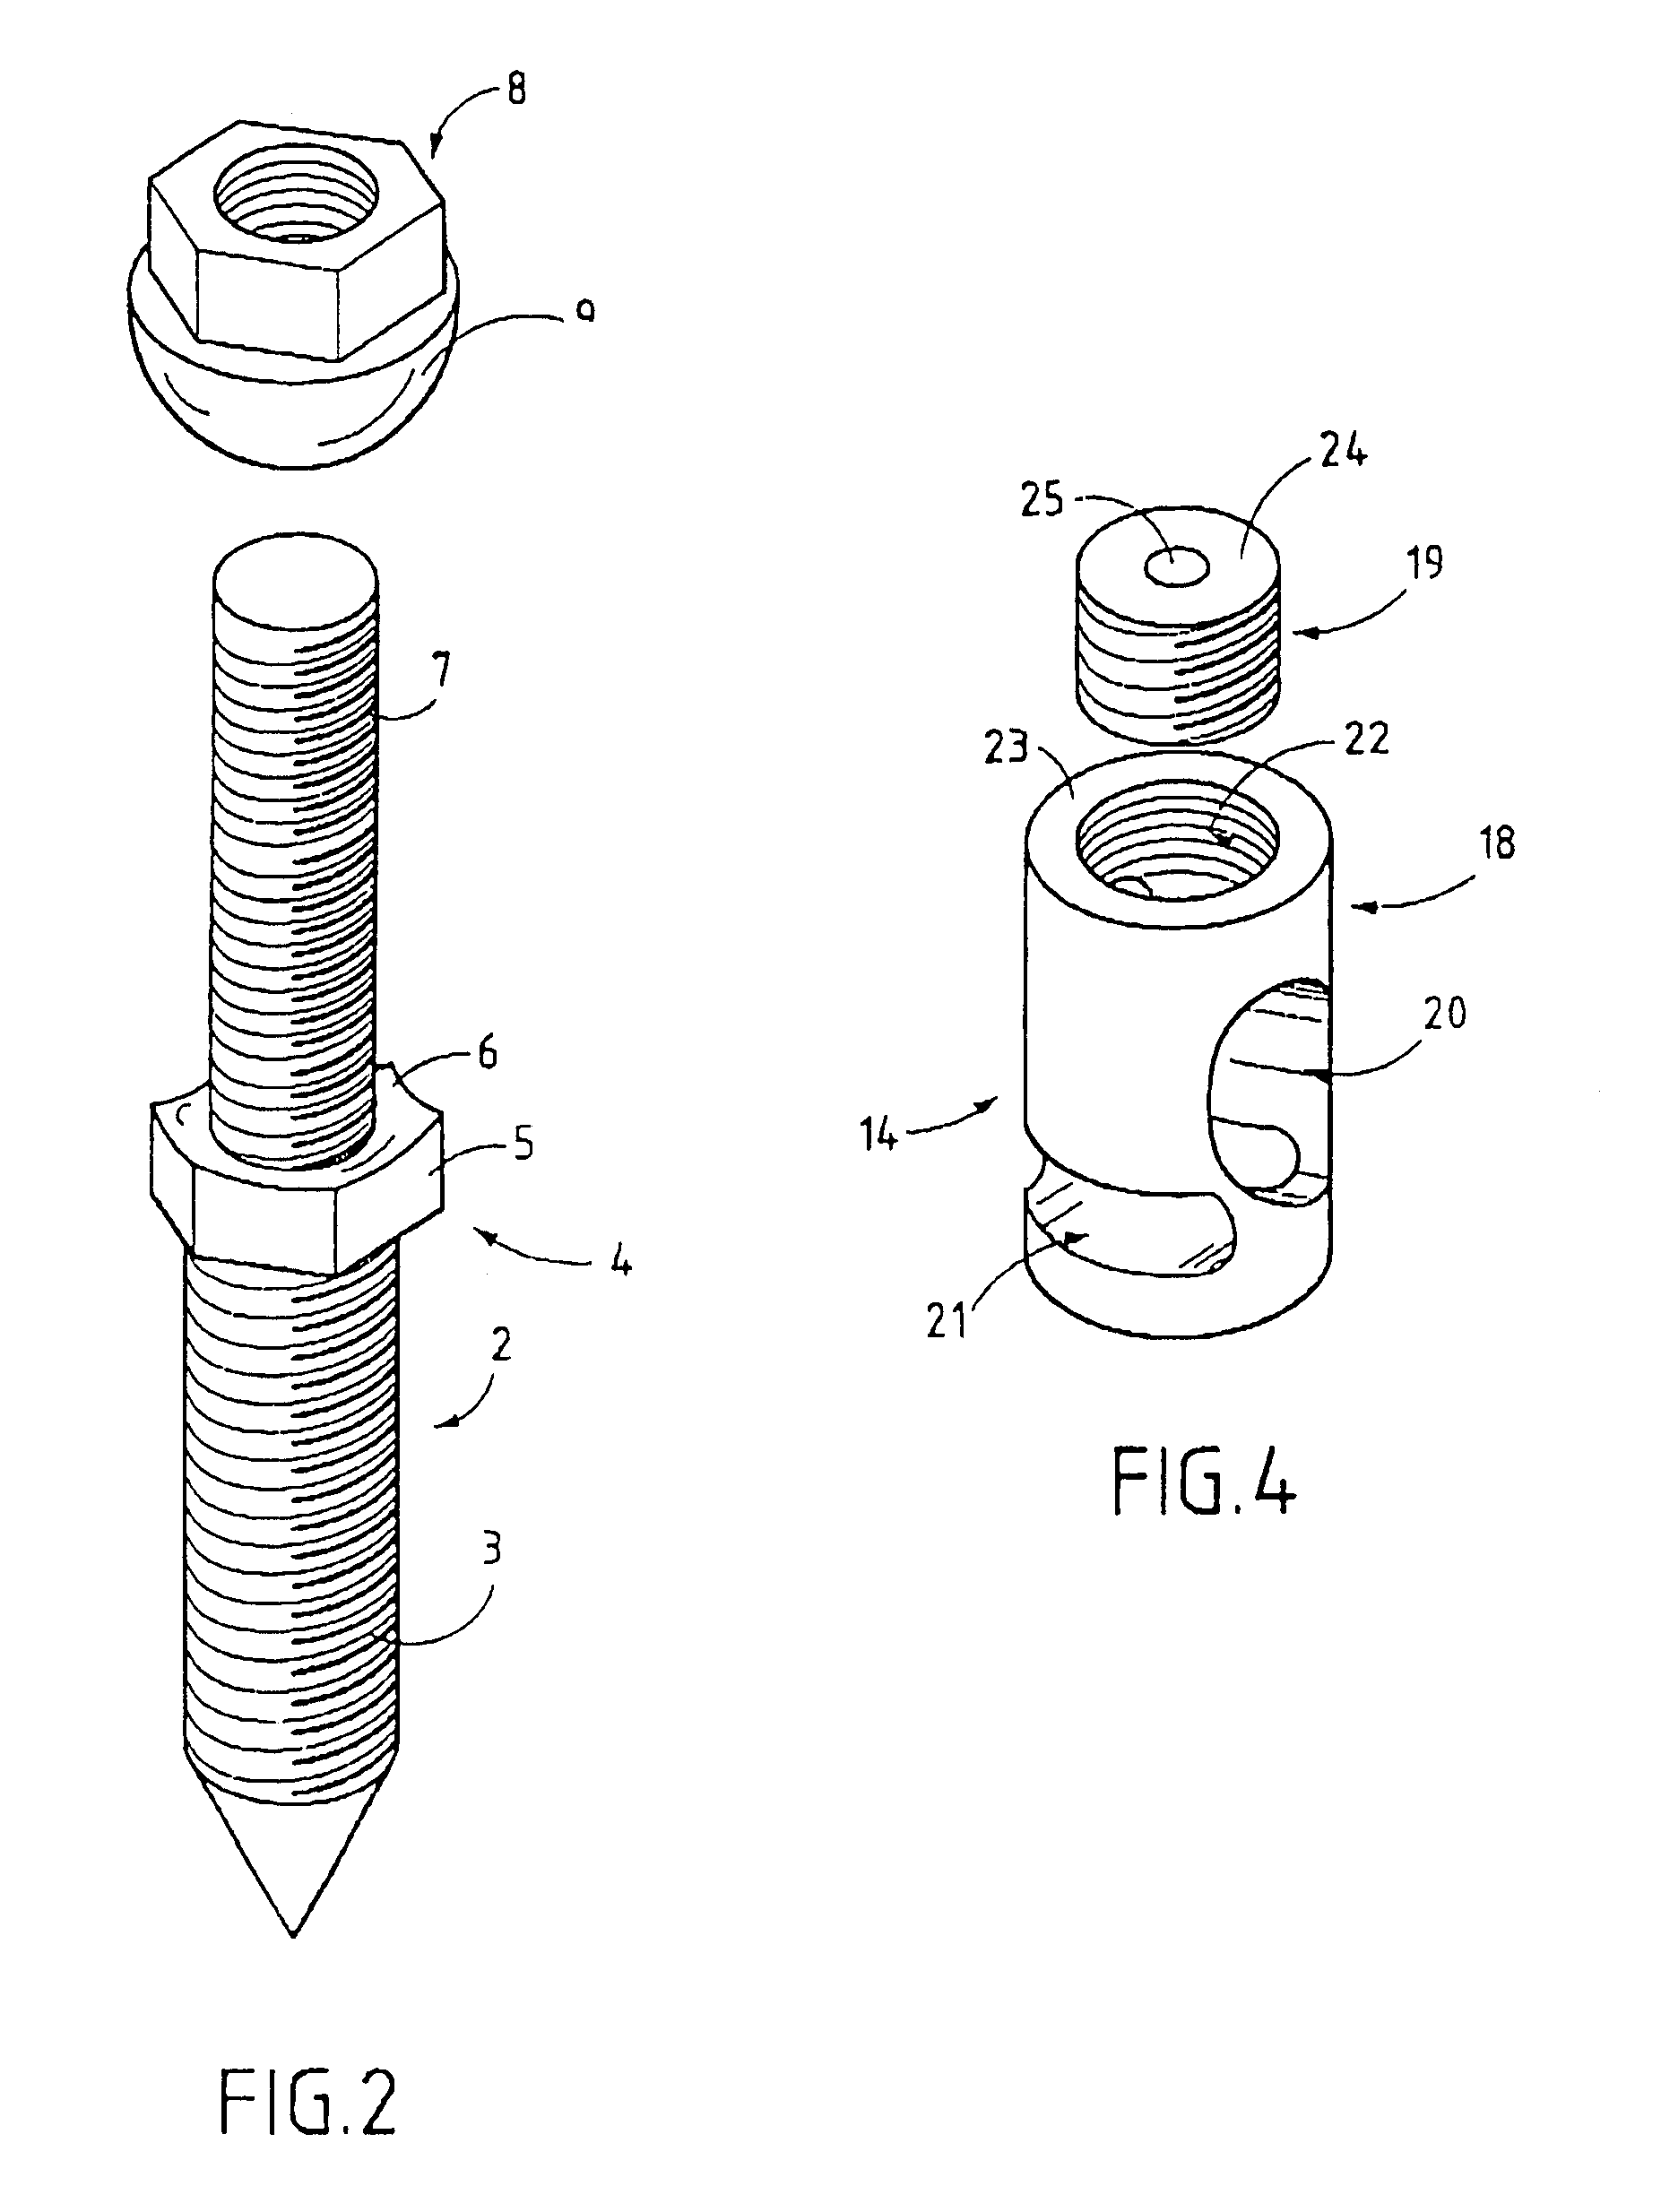 Connection device for osteosynthesis